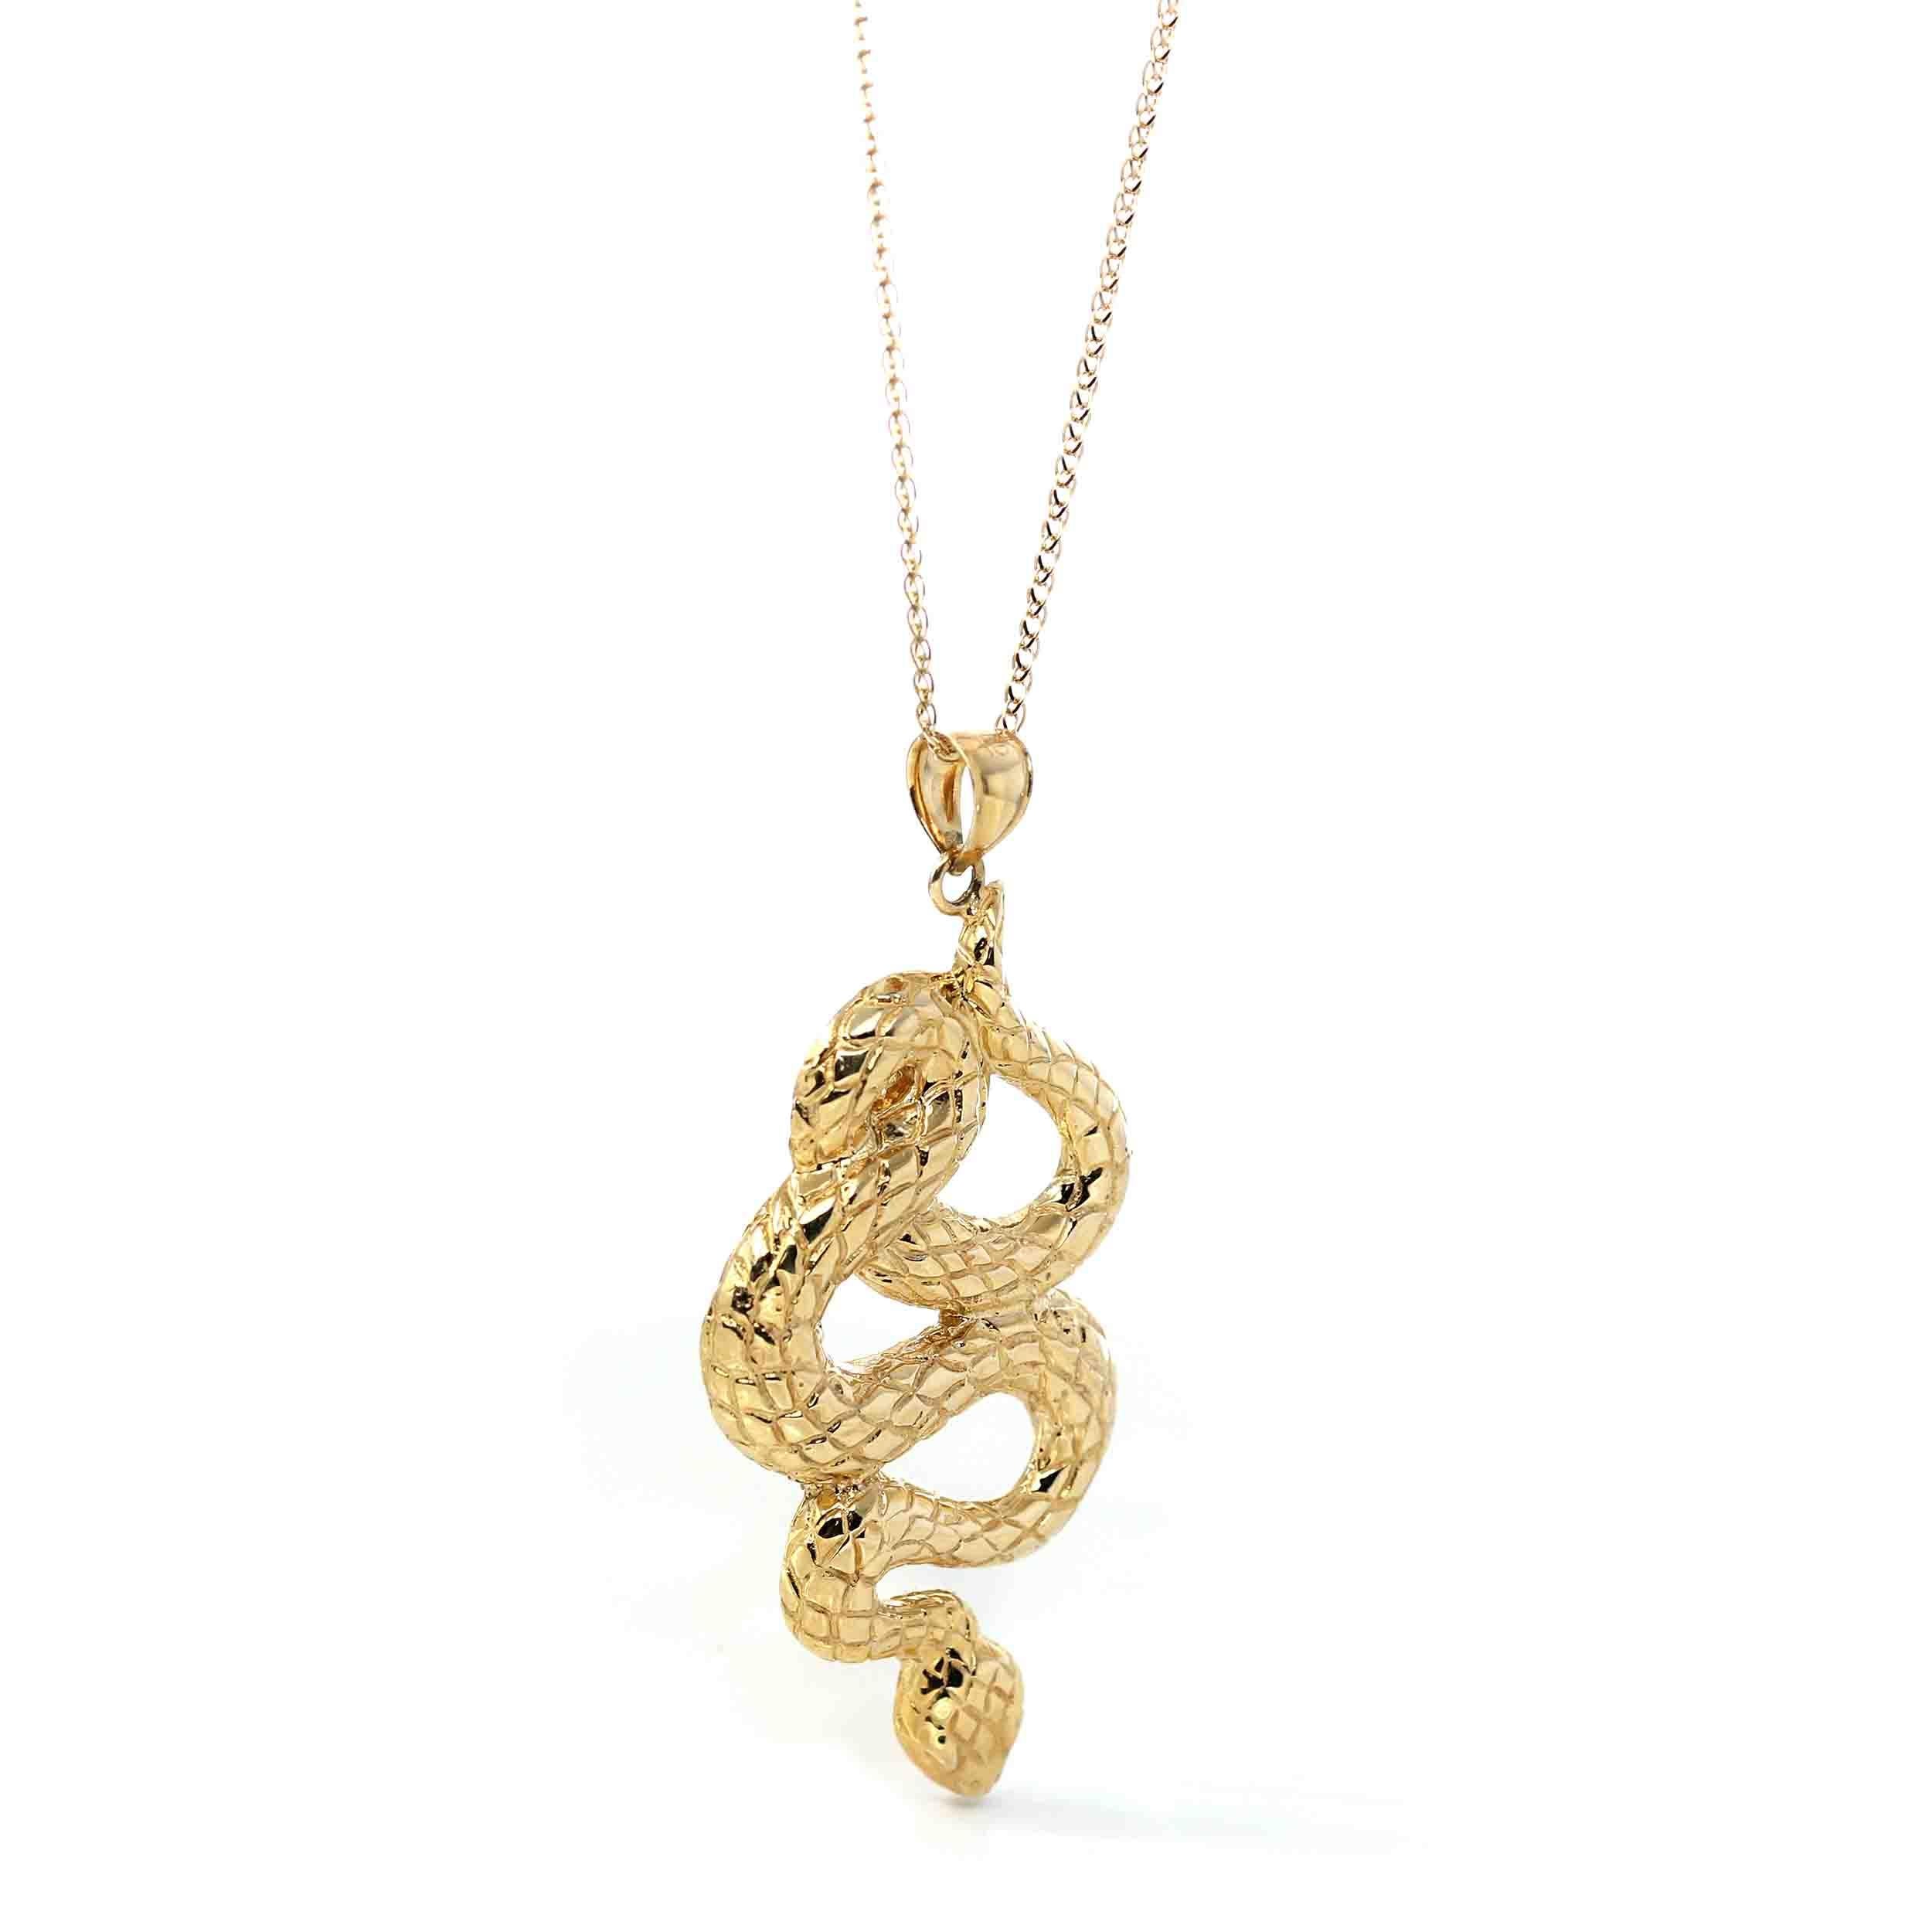 * INTRODUCTION----- This pendant is made with 14K yellow pure gold. It is made solid style. It looks very exquisite. The luxury yellow gold pendant is very shiny. Every angles and lines are so beautiful. It's an affordable gold gift for yourself and